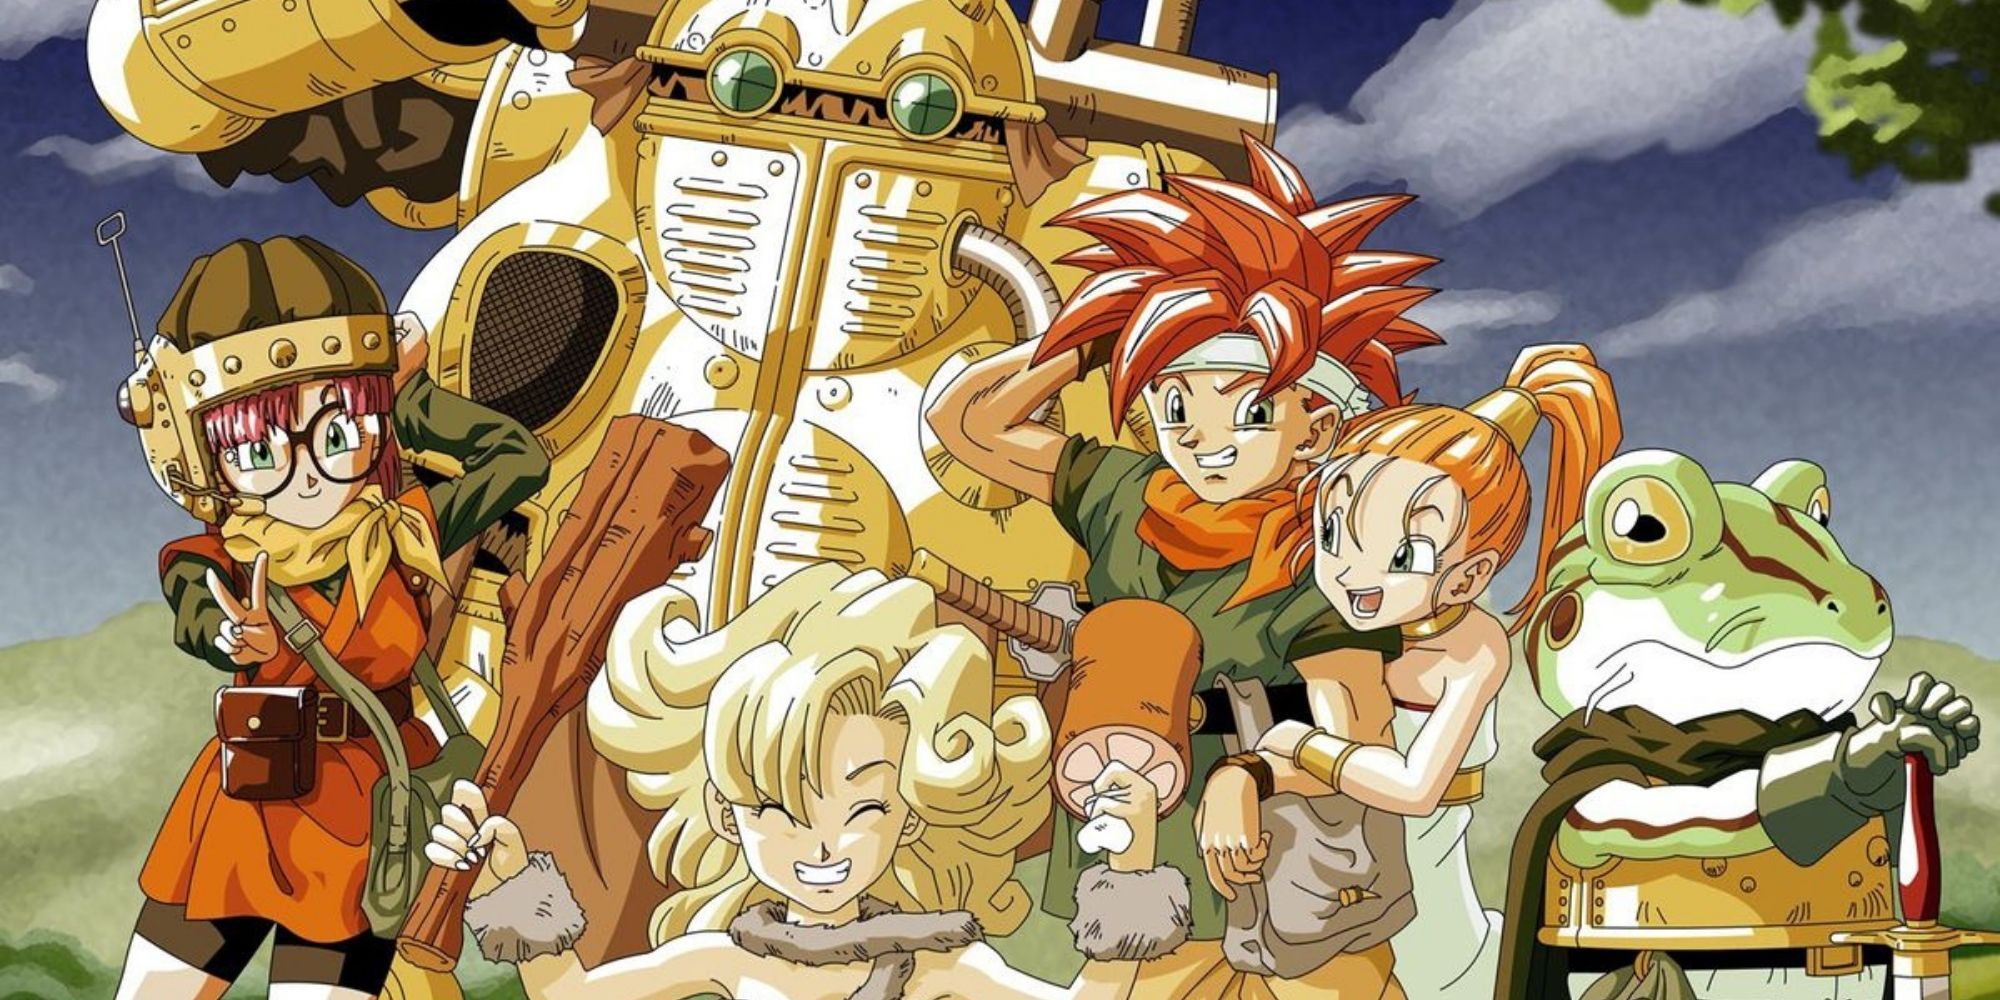 Chrono And His Team Smiling And Posing in chrono trigger